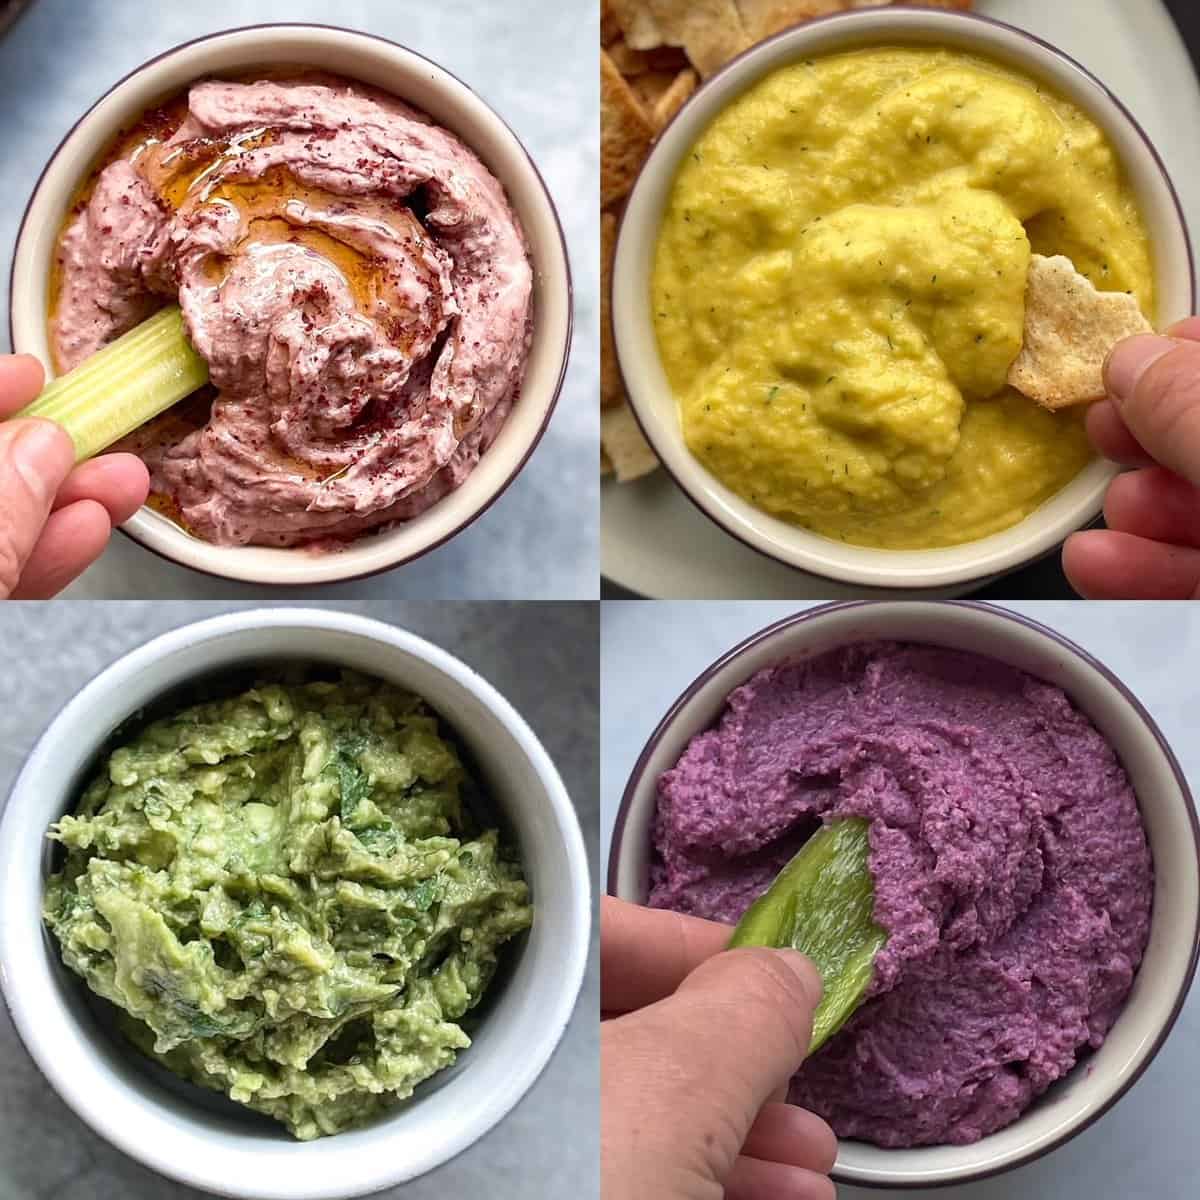 four images with a red dip and celery on top left, yellow dip and pita top right, guacamole bottom left, and purple dip with green pepper bottom right.